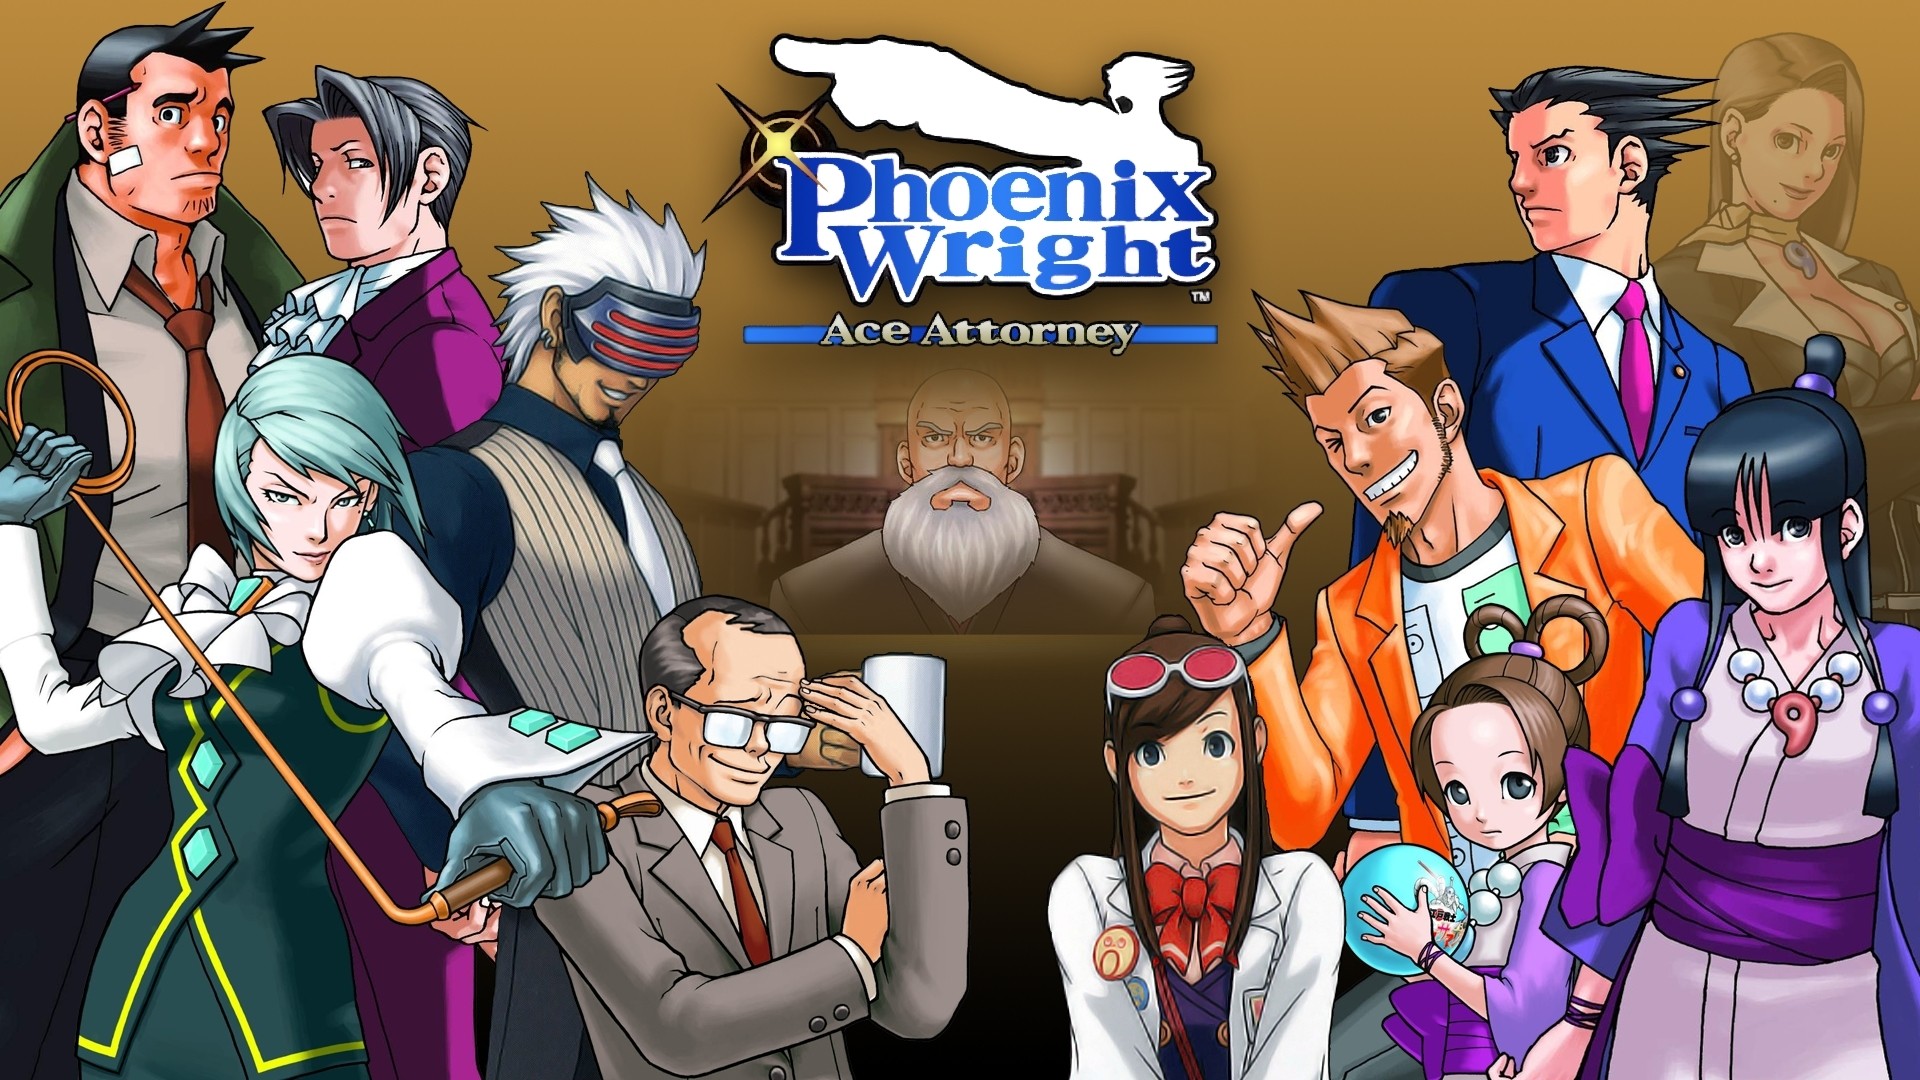 1920x1080 Phoenix Wright images Wallpaper 2 HD wallpaper and background photos